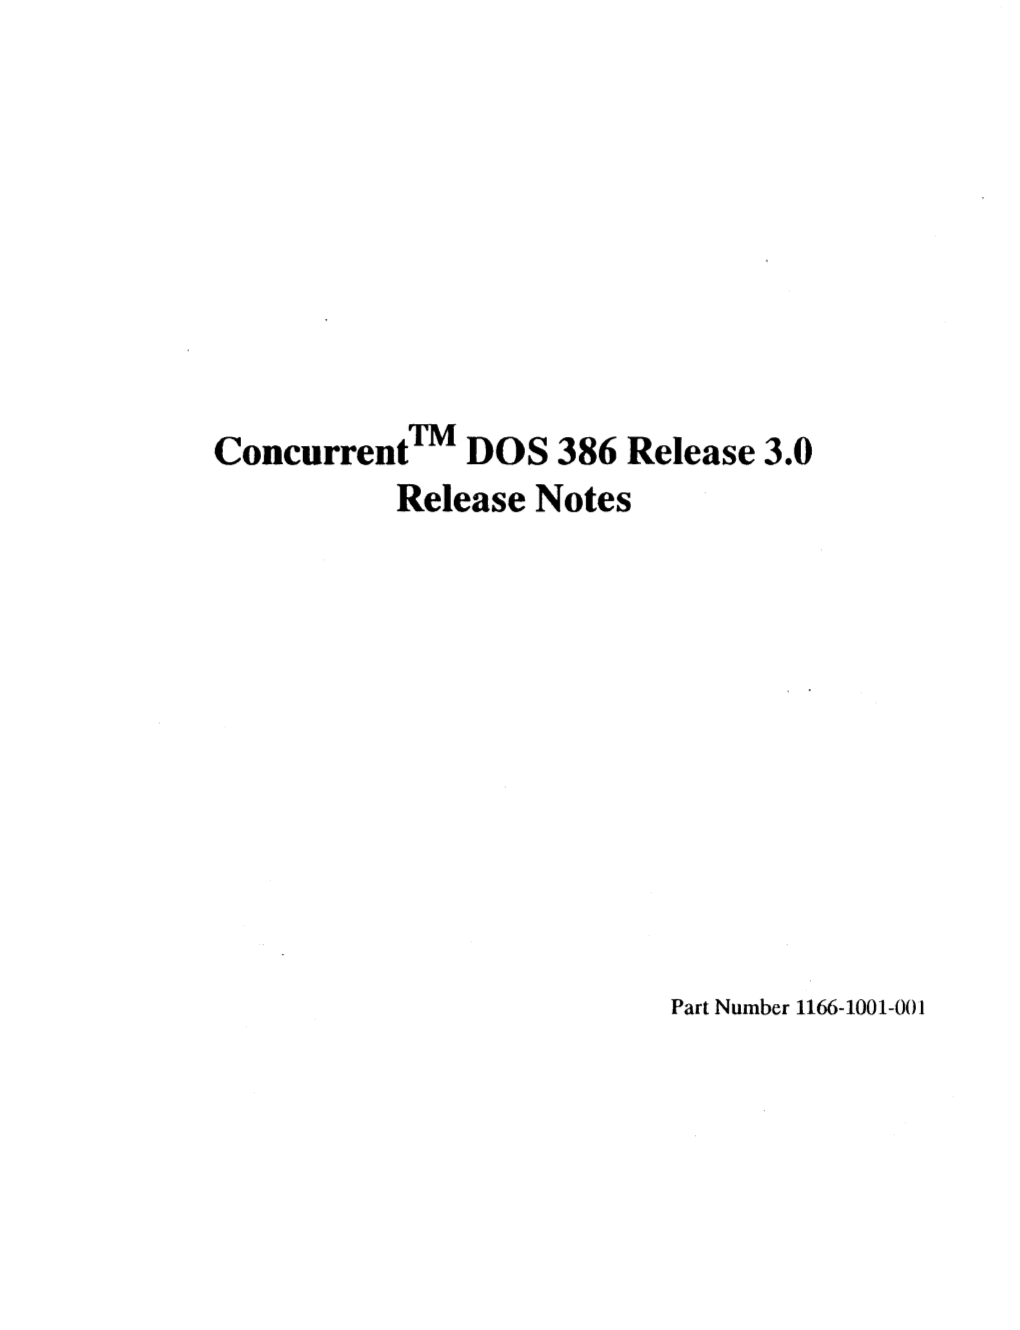 Concurrent™ DOS 386 Release 3.0 Release Notes